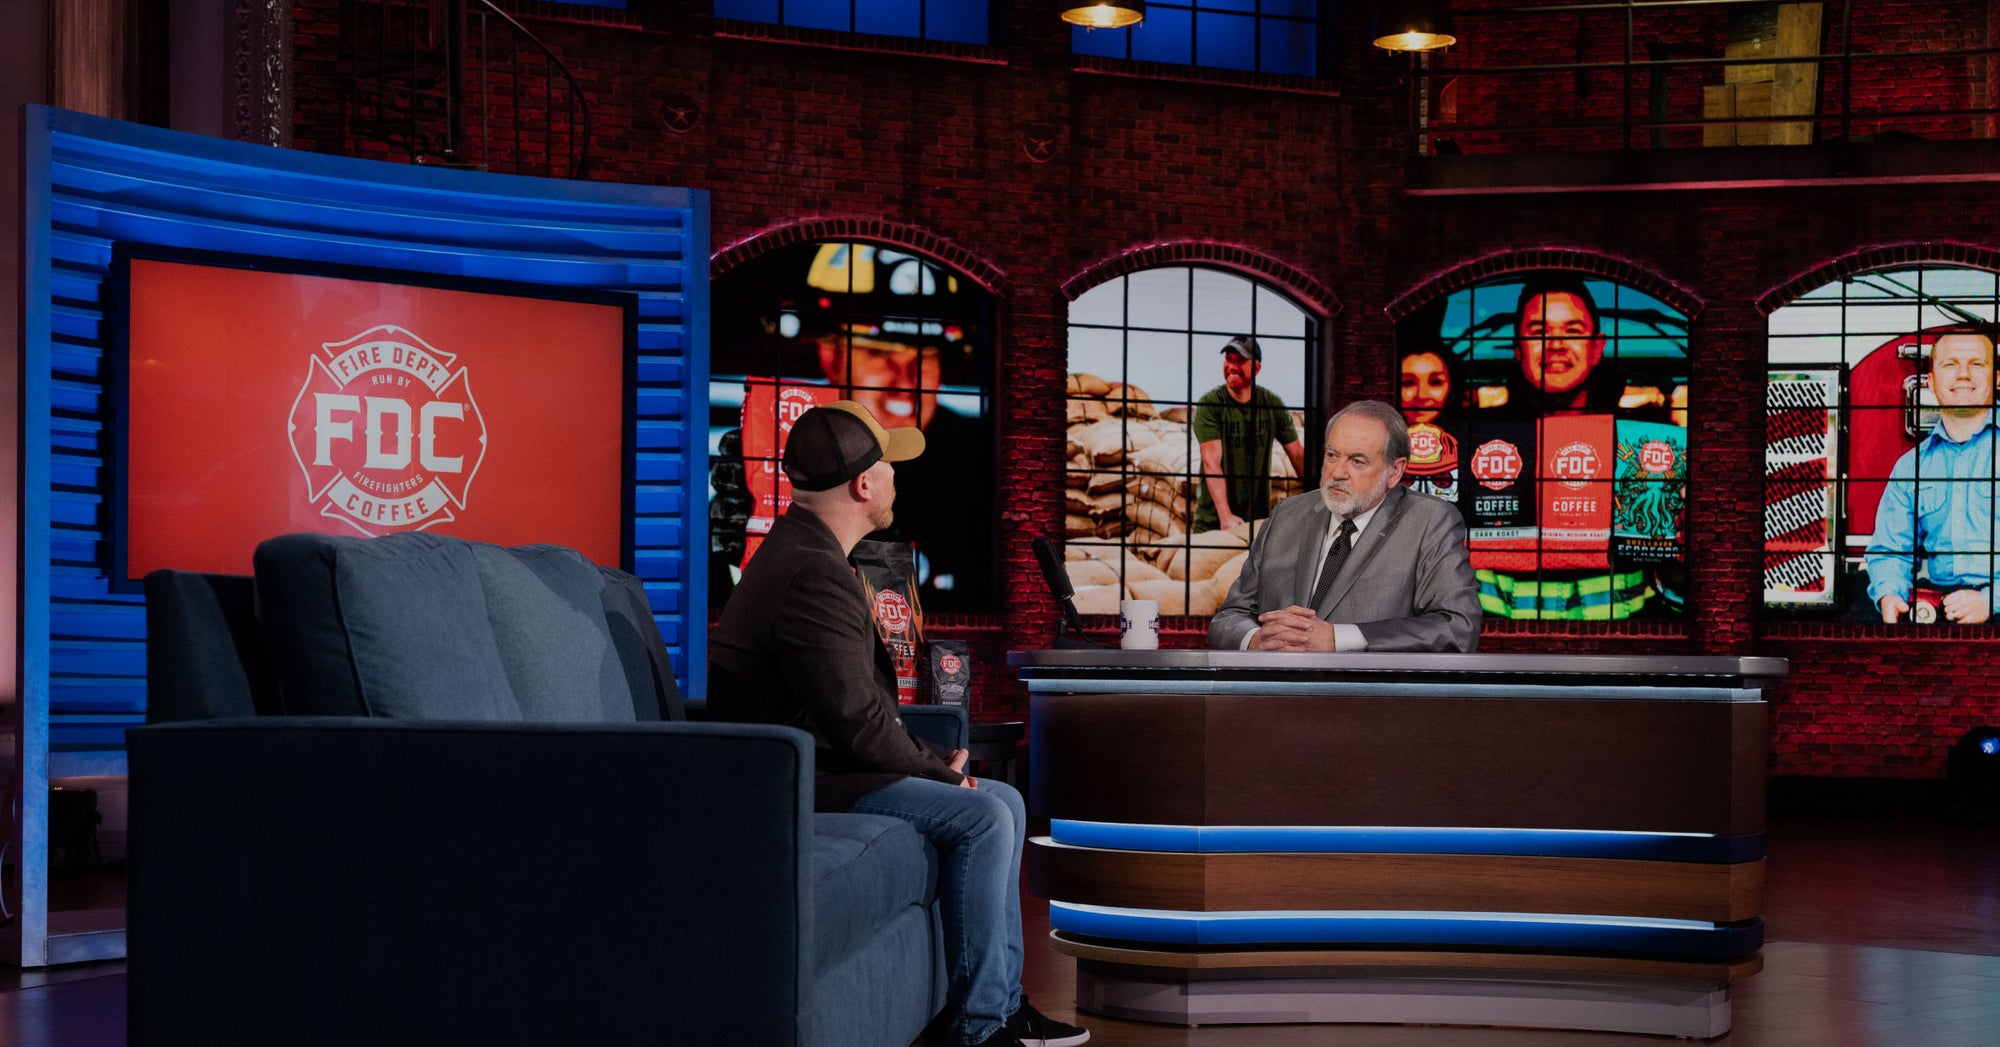 Luke Schneider, CEO and Founder of Fire Department Coffee, featured on the Huckabee Show as part of the Huck's Hero segment.